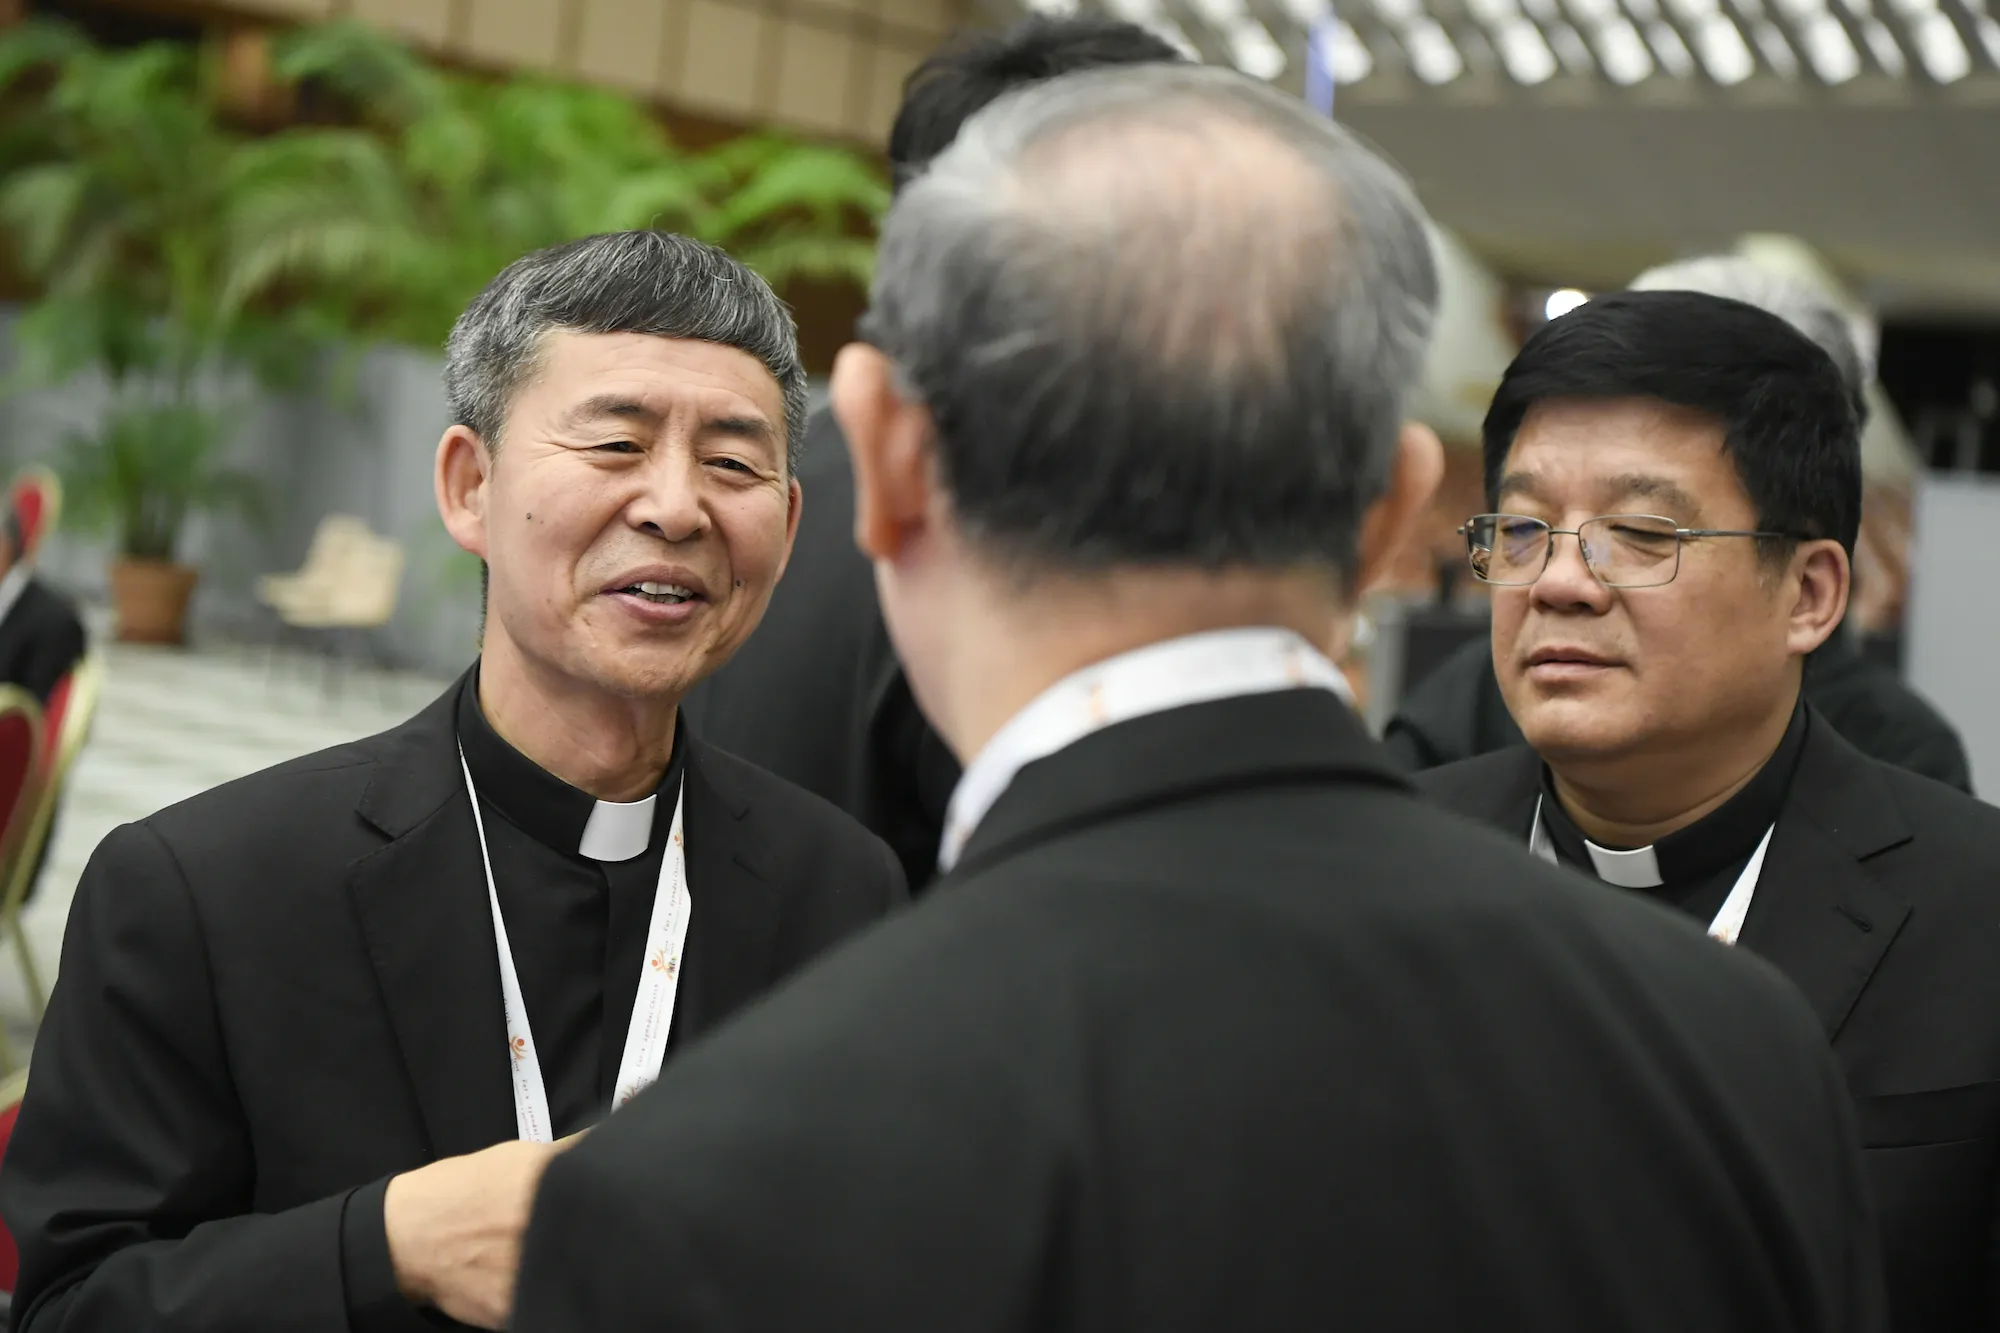 Bishop Yao Shun of Jining  and Bishop Yang Yongqiang of Zhouchun (right) of the People's Republic of China at the Synod on Synodality at the Vatican in October 2023.?w=200&h=150